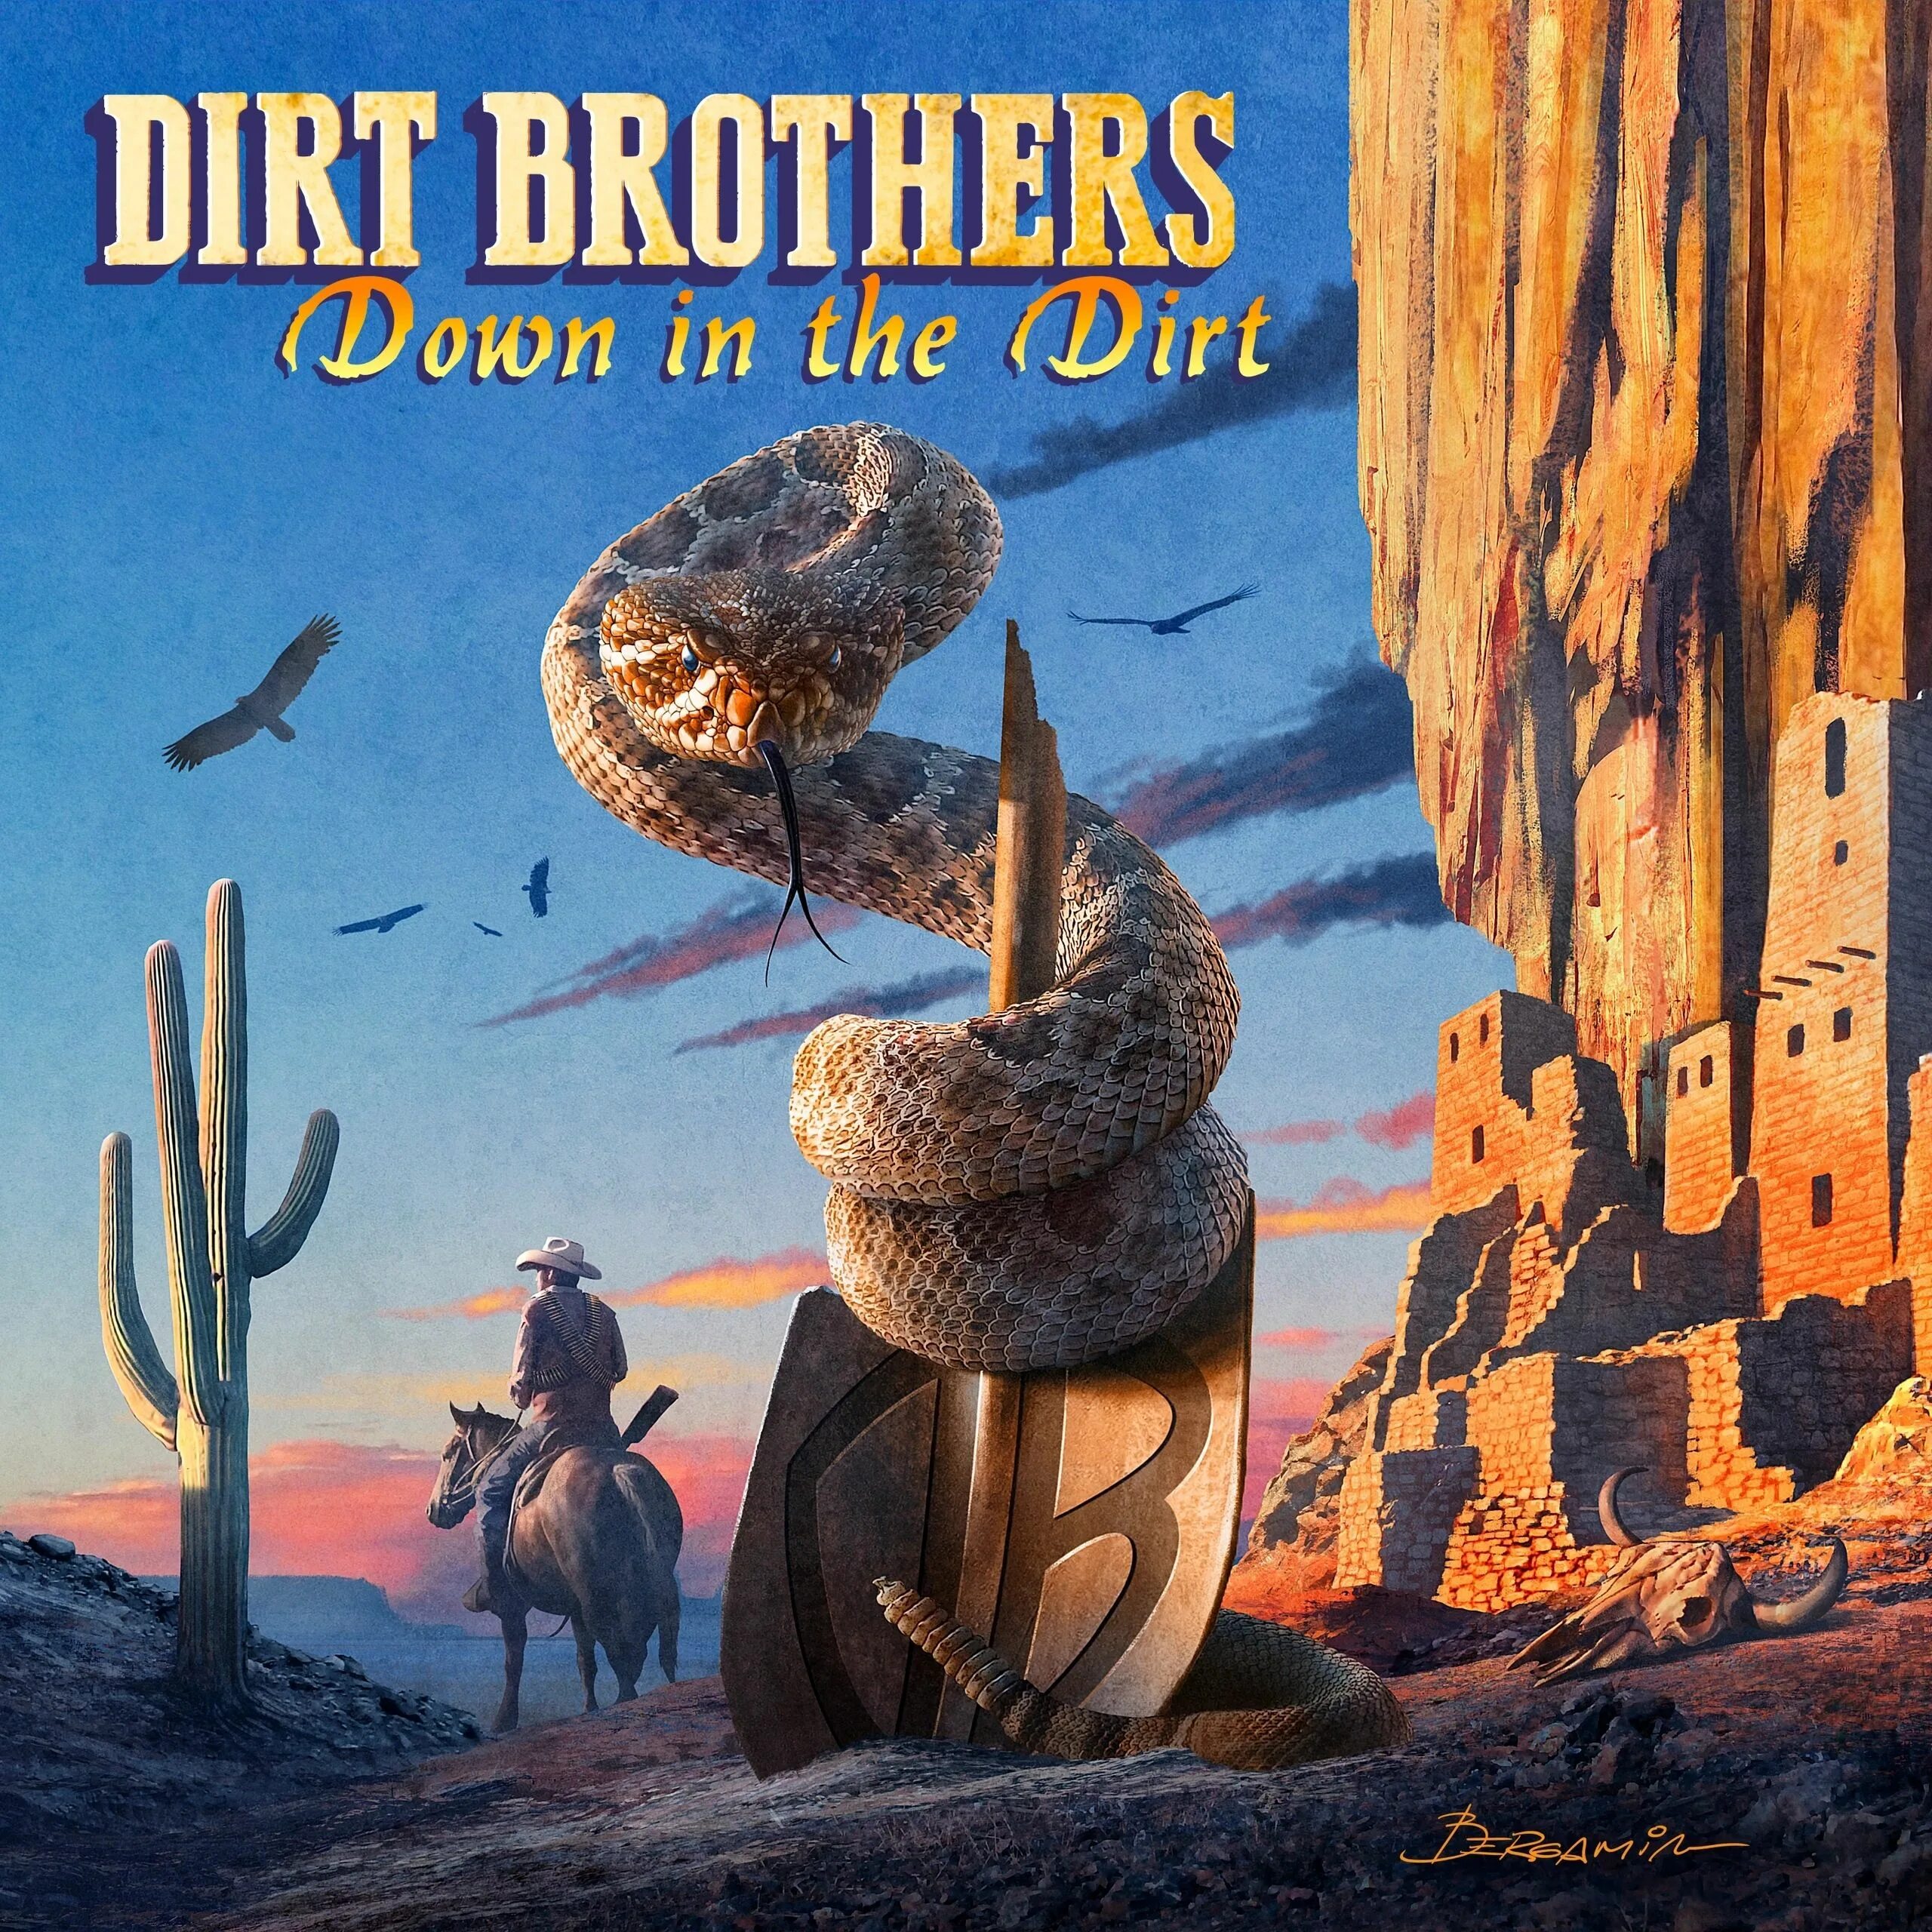 Dirty brothers. The Dirt 2019. Dirty Bros. 2019 The Dirt обложка альбома.